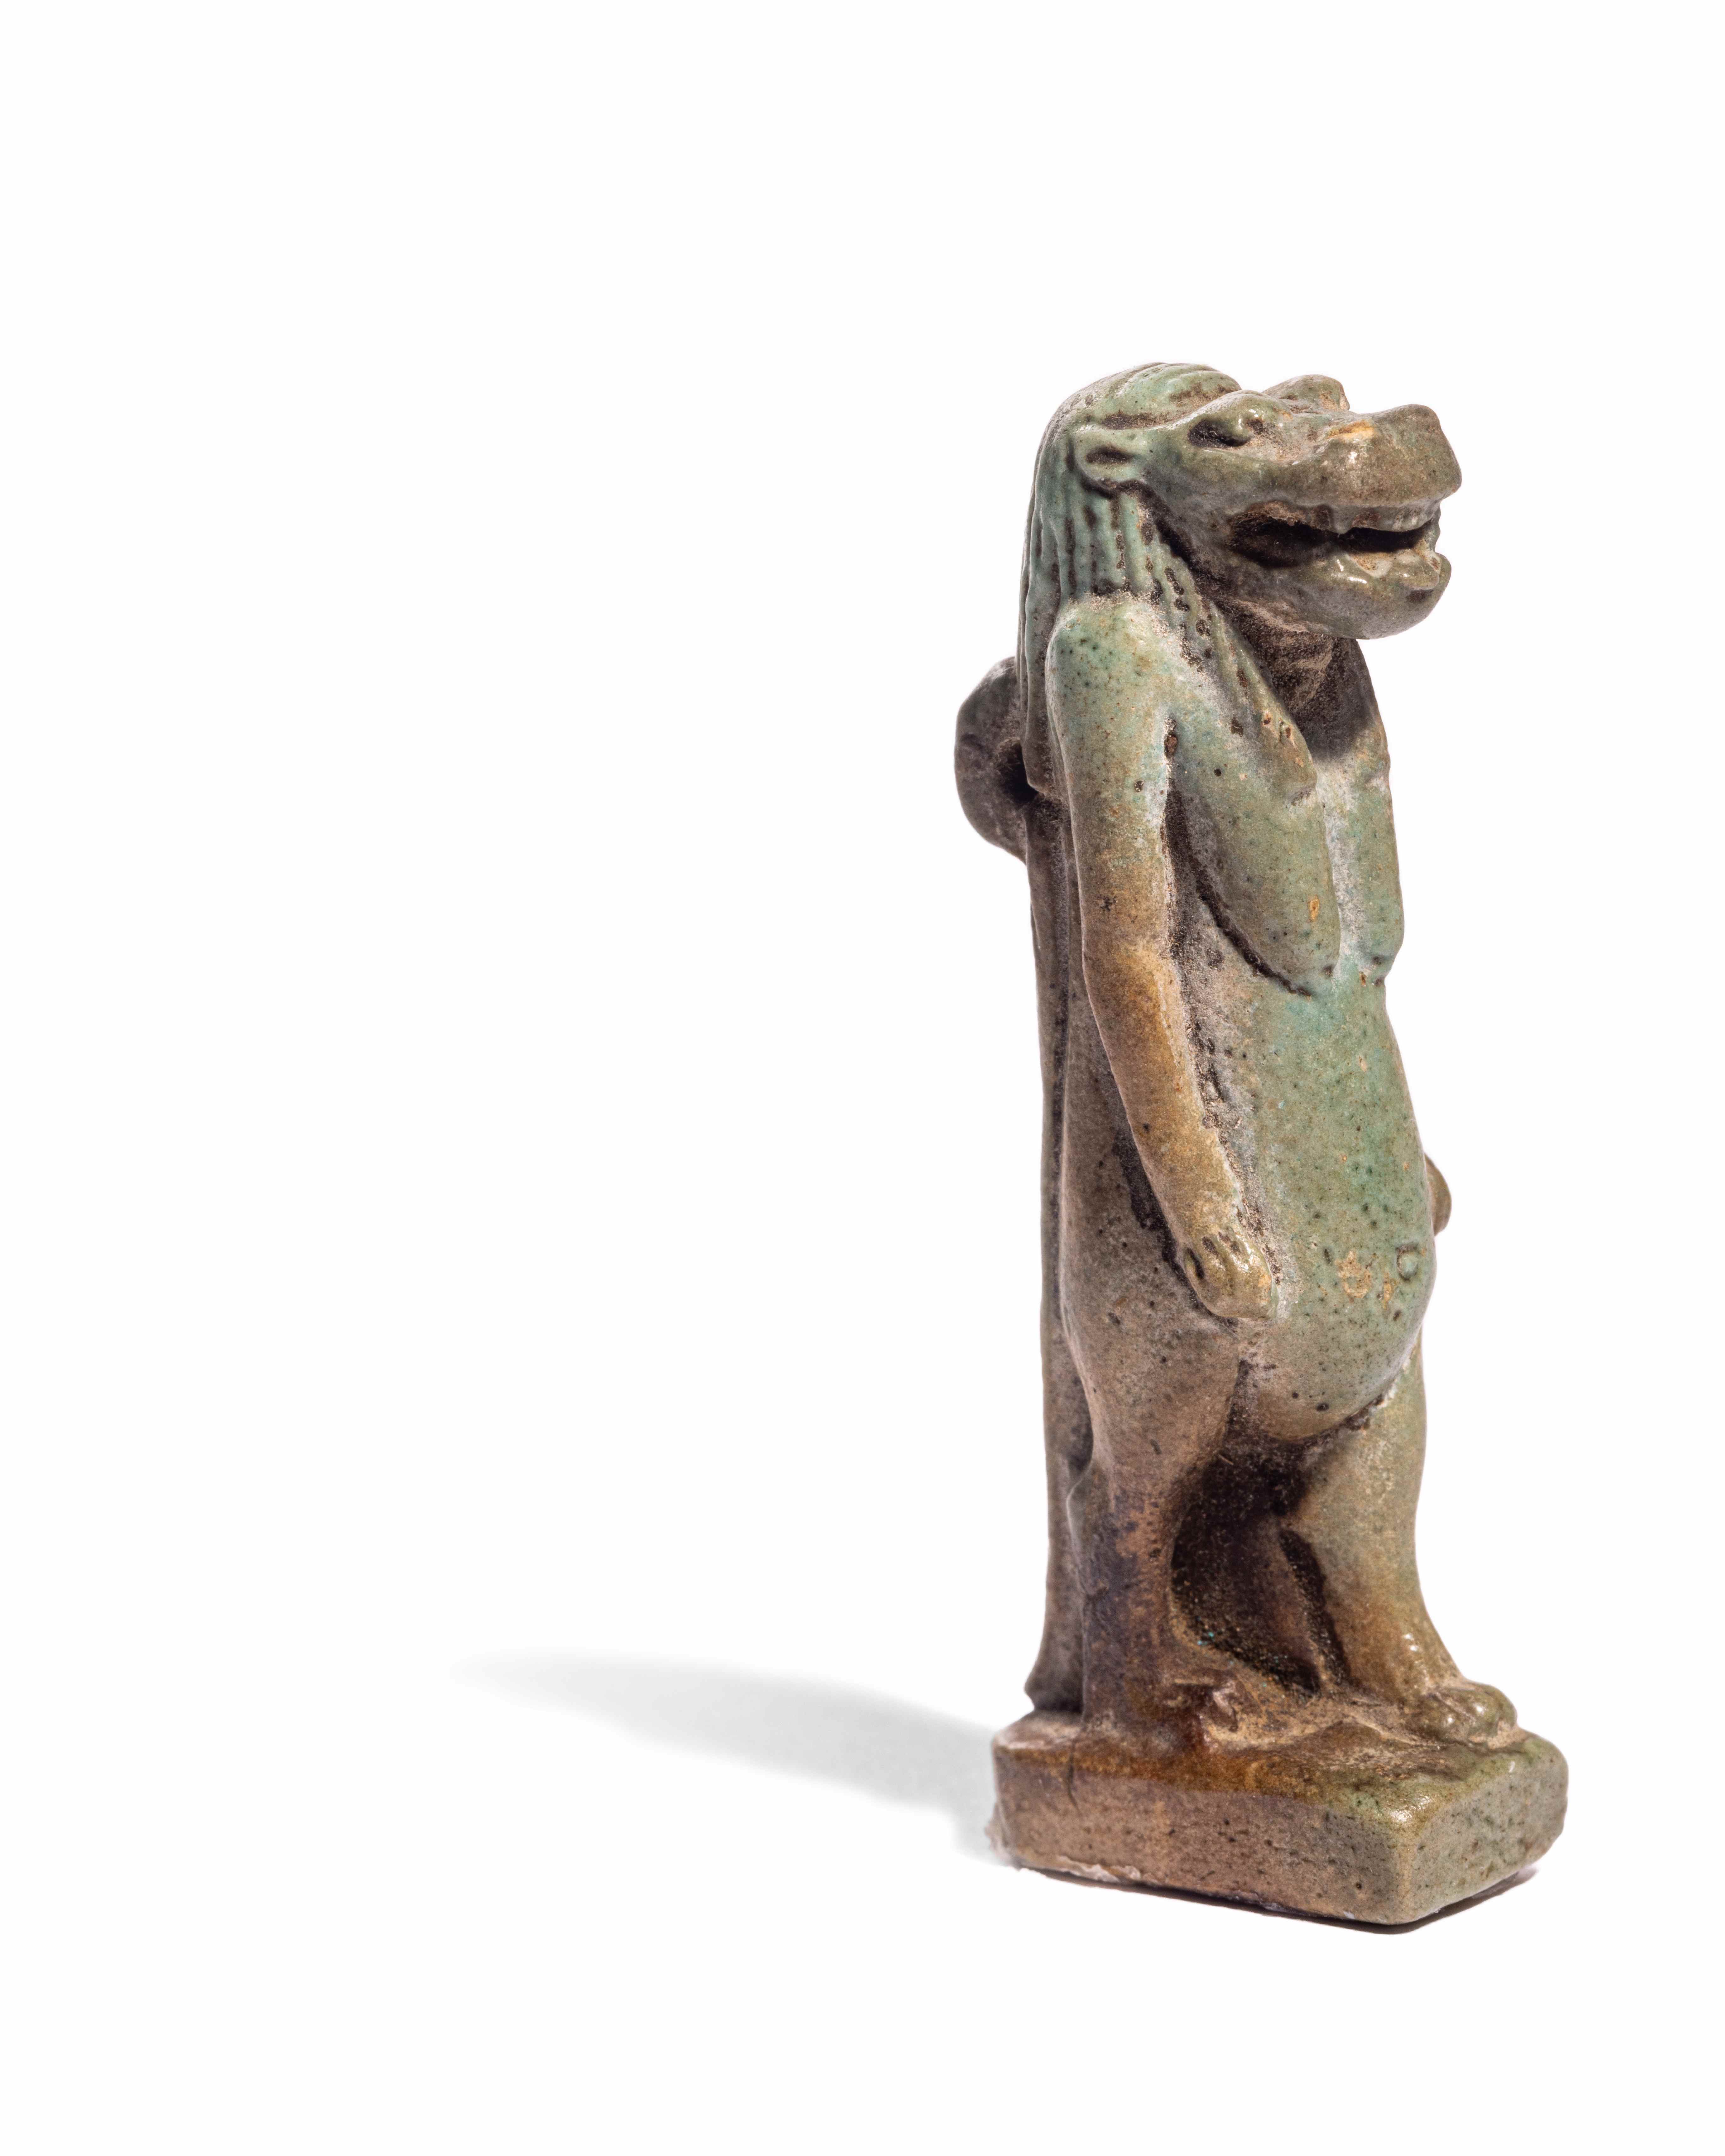 An Egyptian Faience Tawaret Height 2 3/4 inches (7 cm). - Image 2 of 6